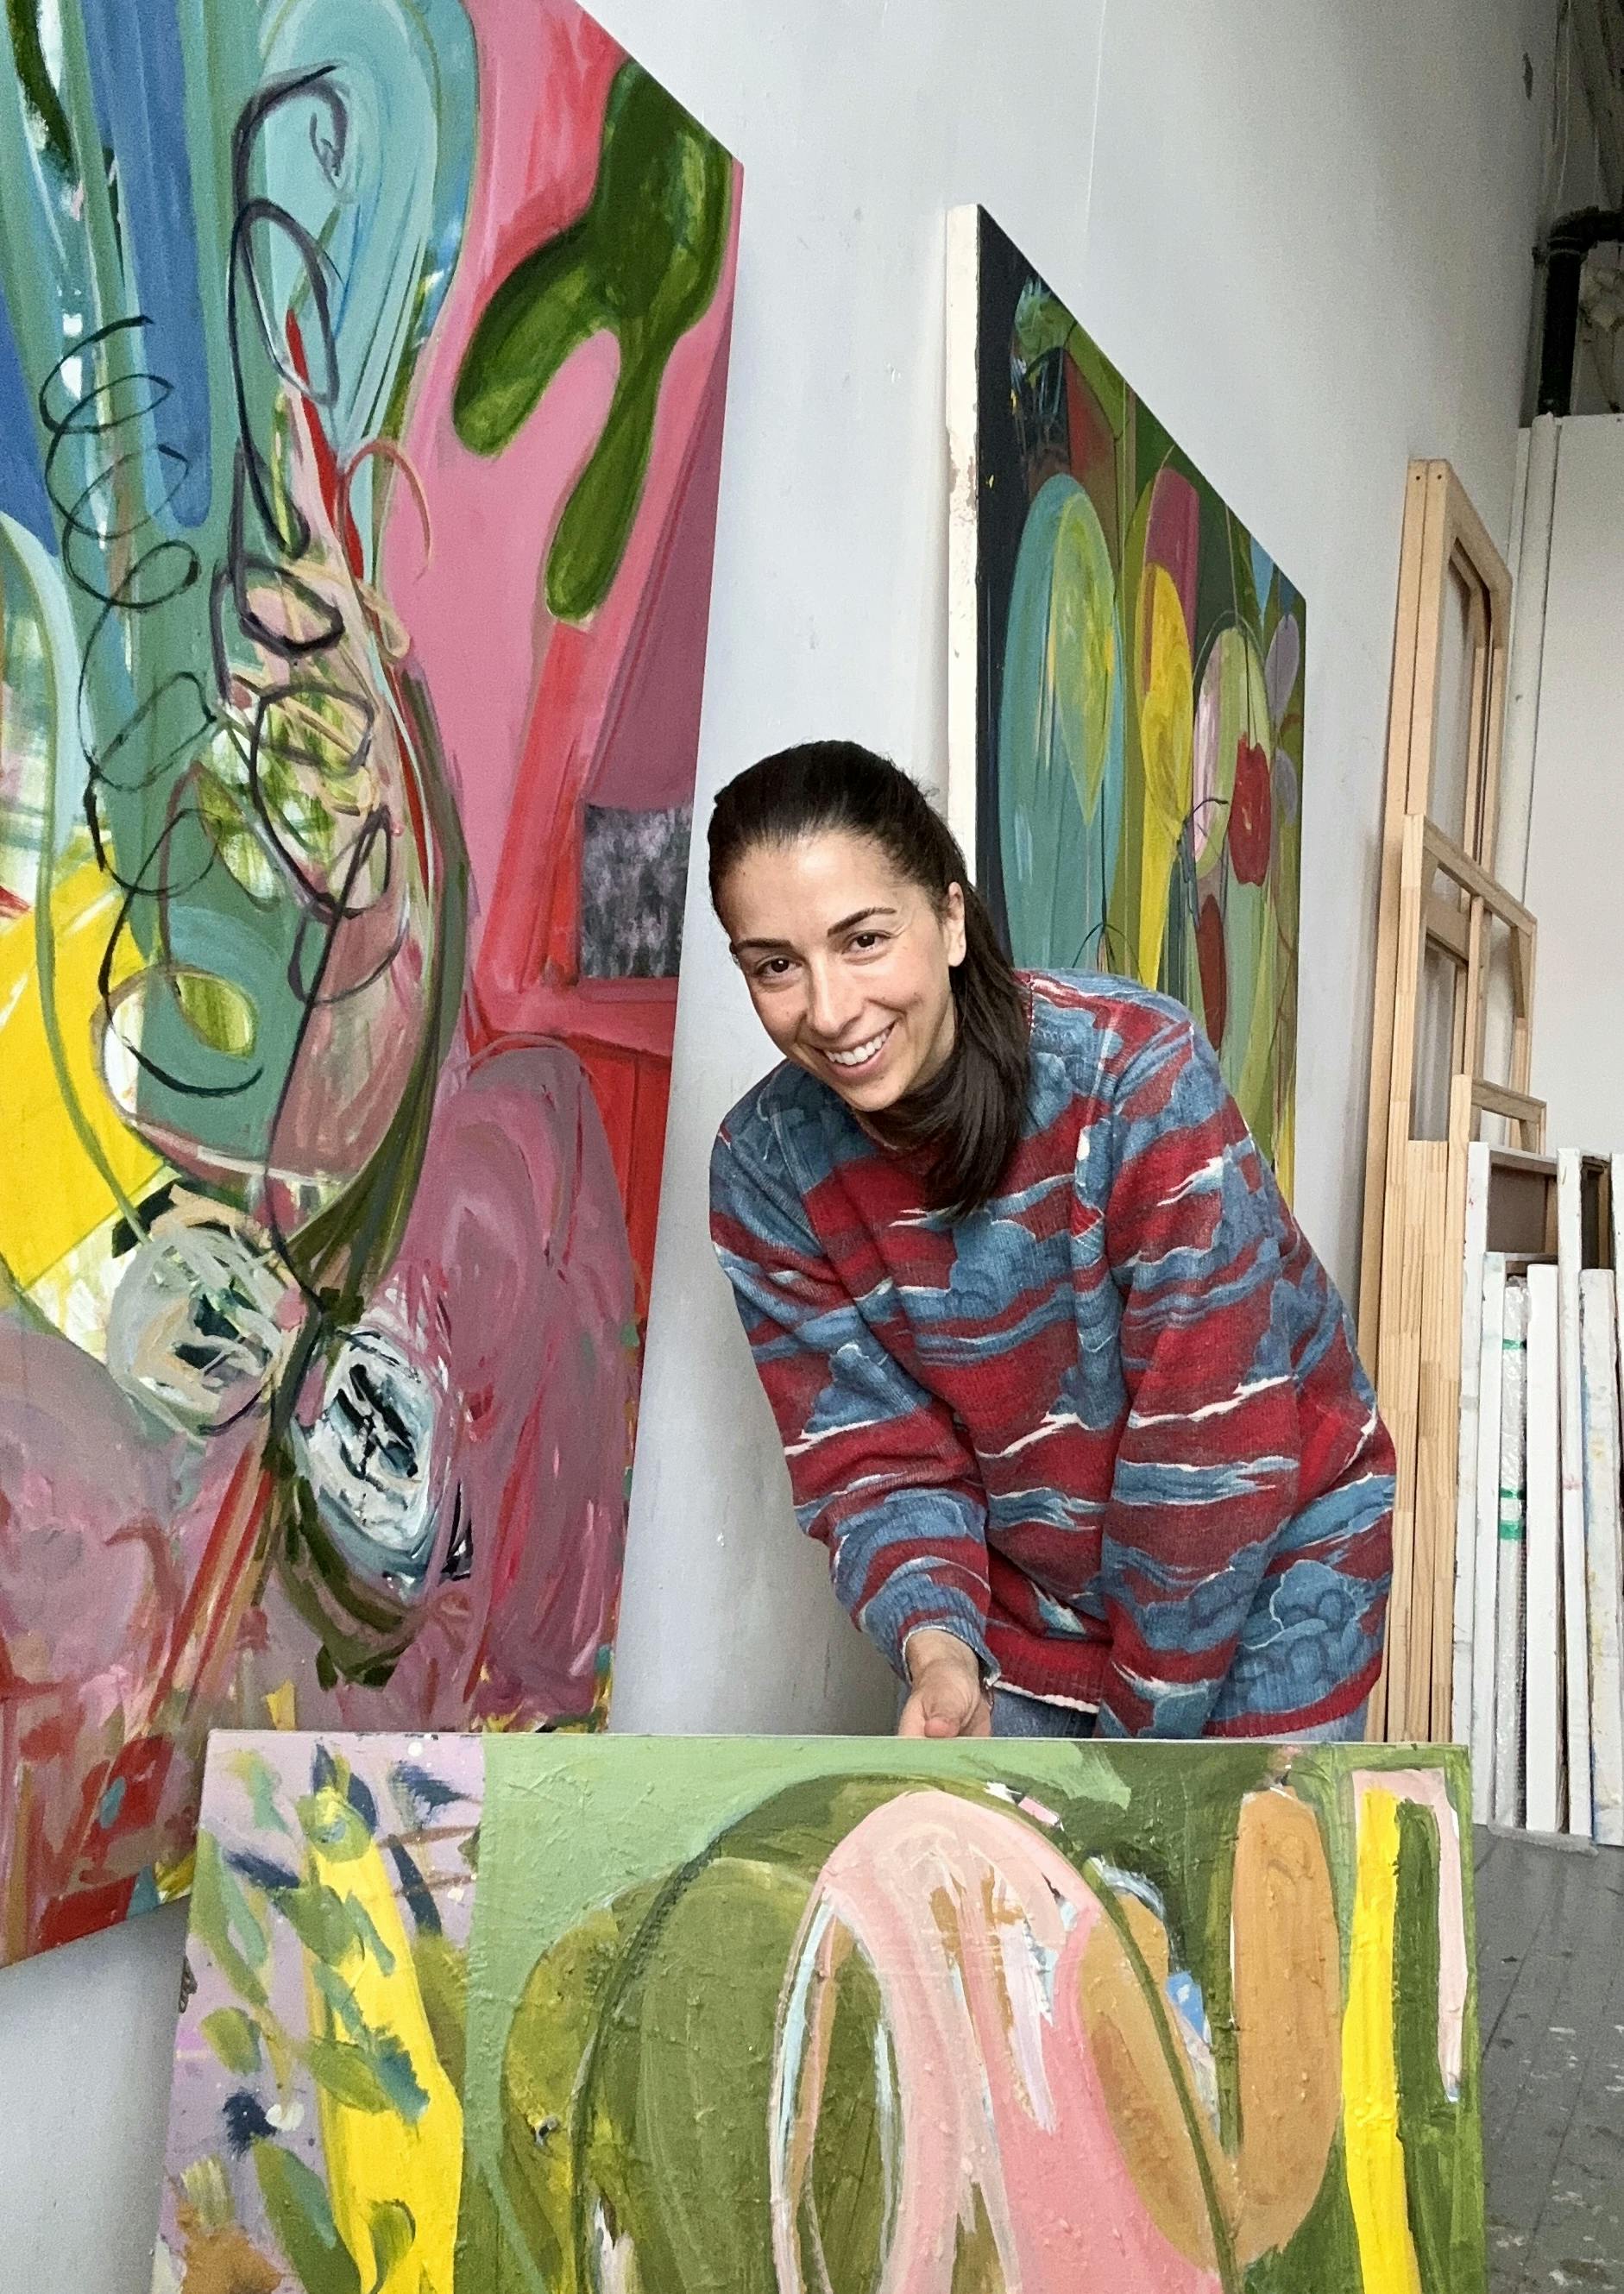 Artist Diana Delgado in the studio standing amongst her colorful, gestural abstract paintings.